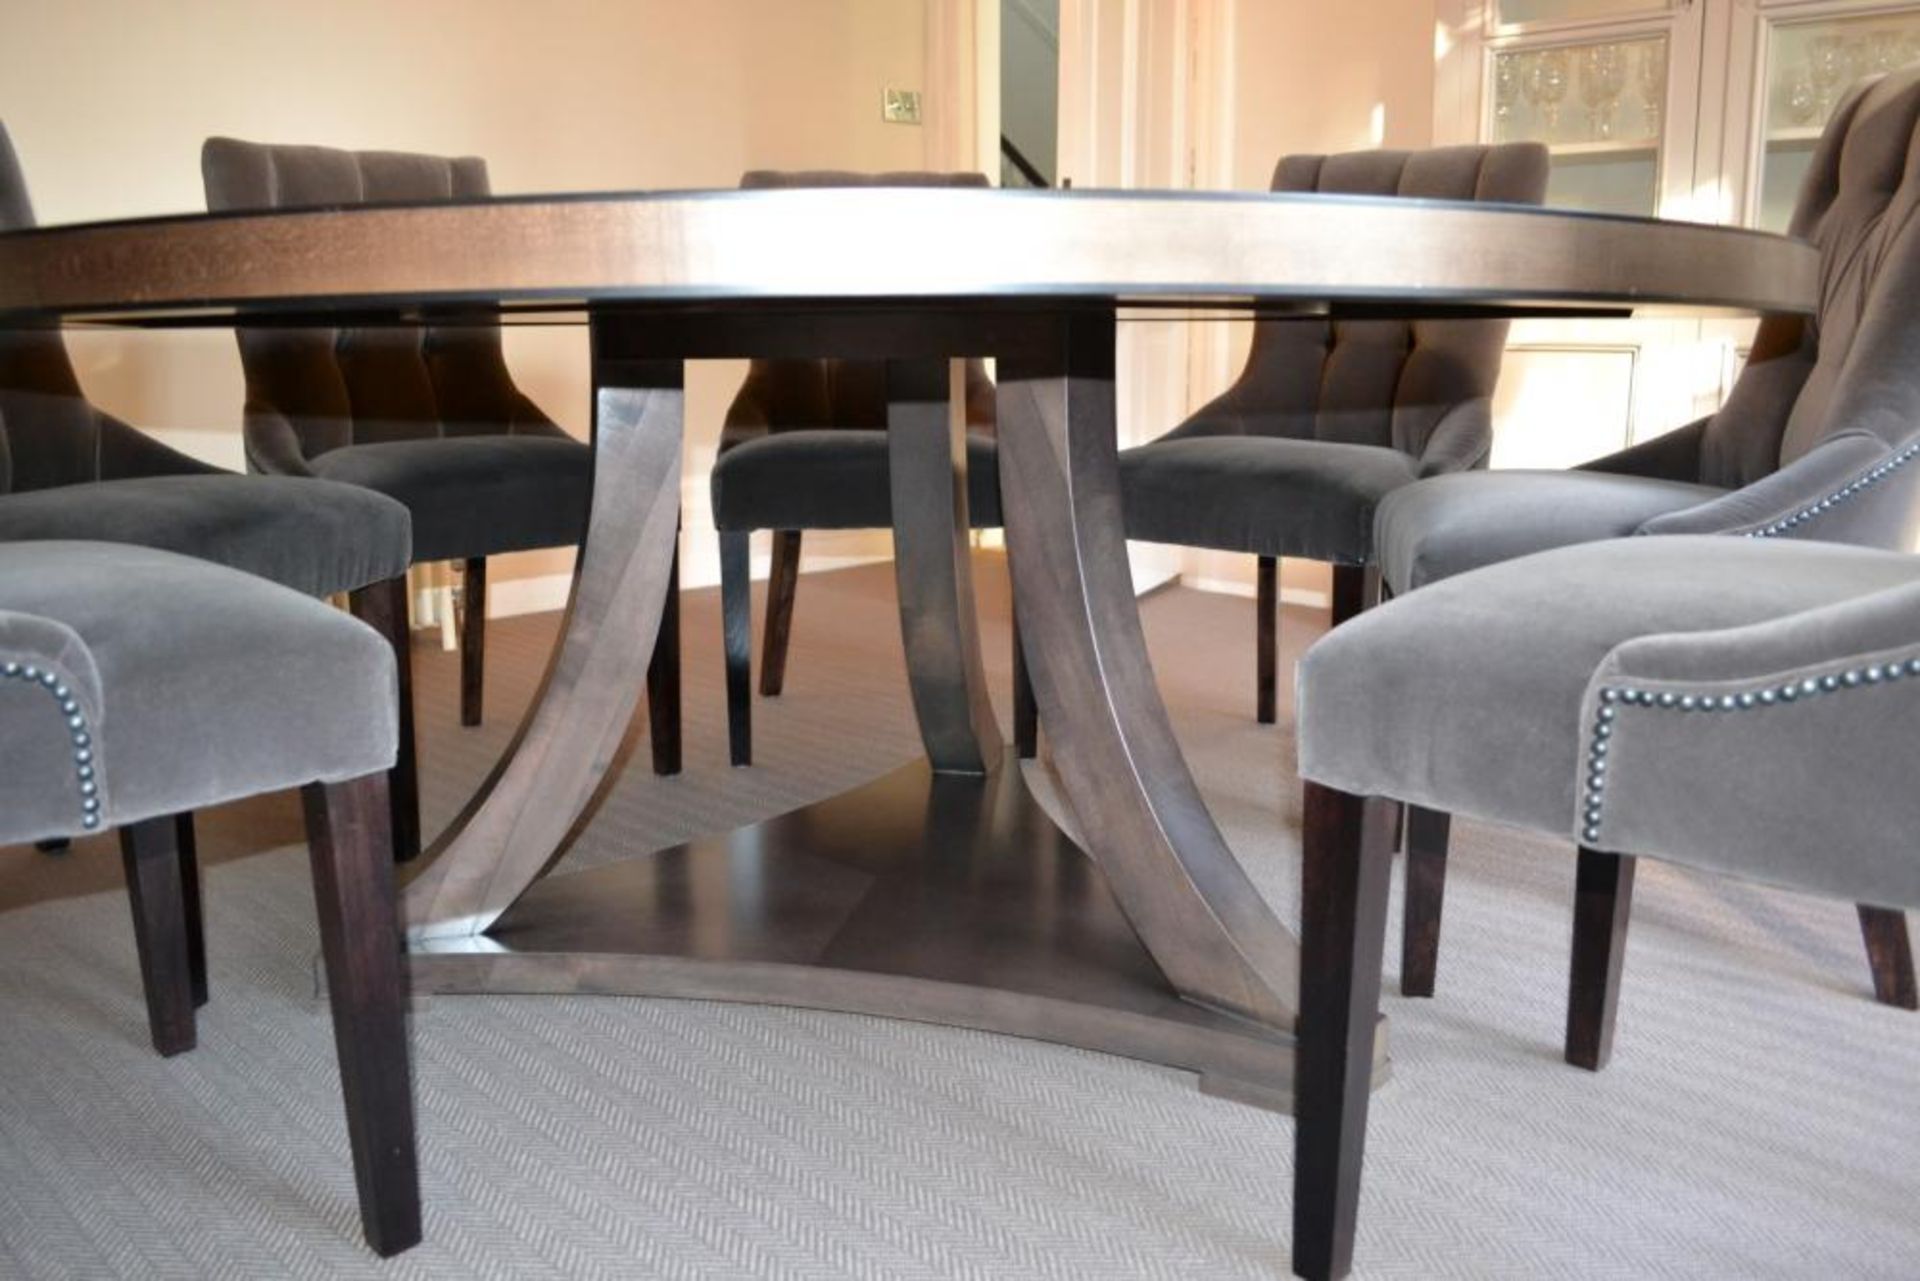 1 x Bespoke Round Dining Table With Sycamore Wood Finish - Includes Set of Six Grey Button Back - Image 20 of 20